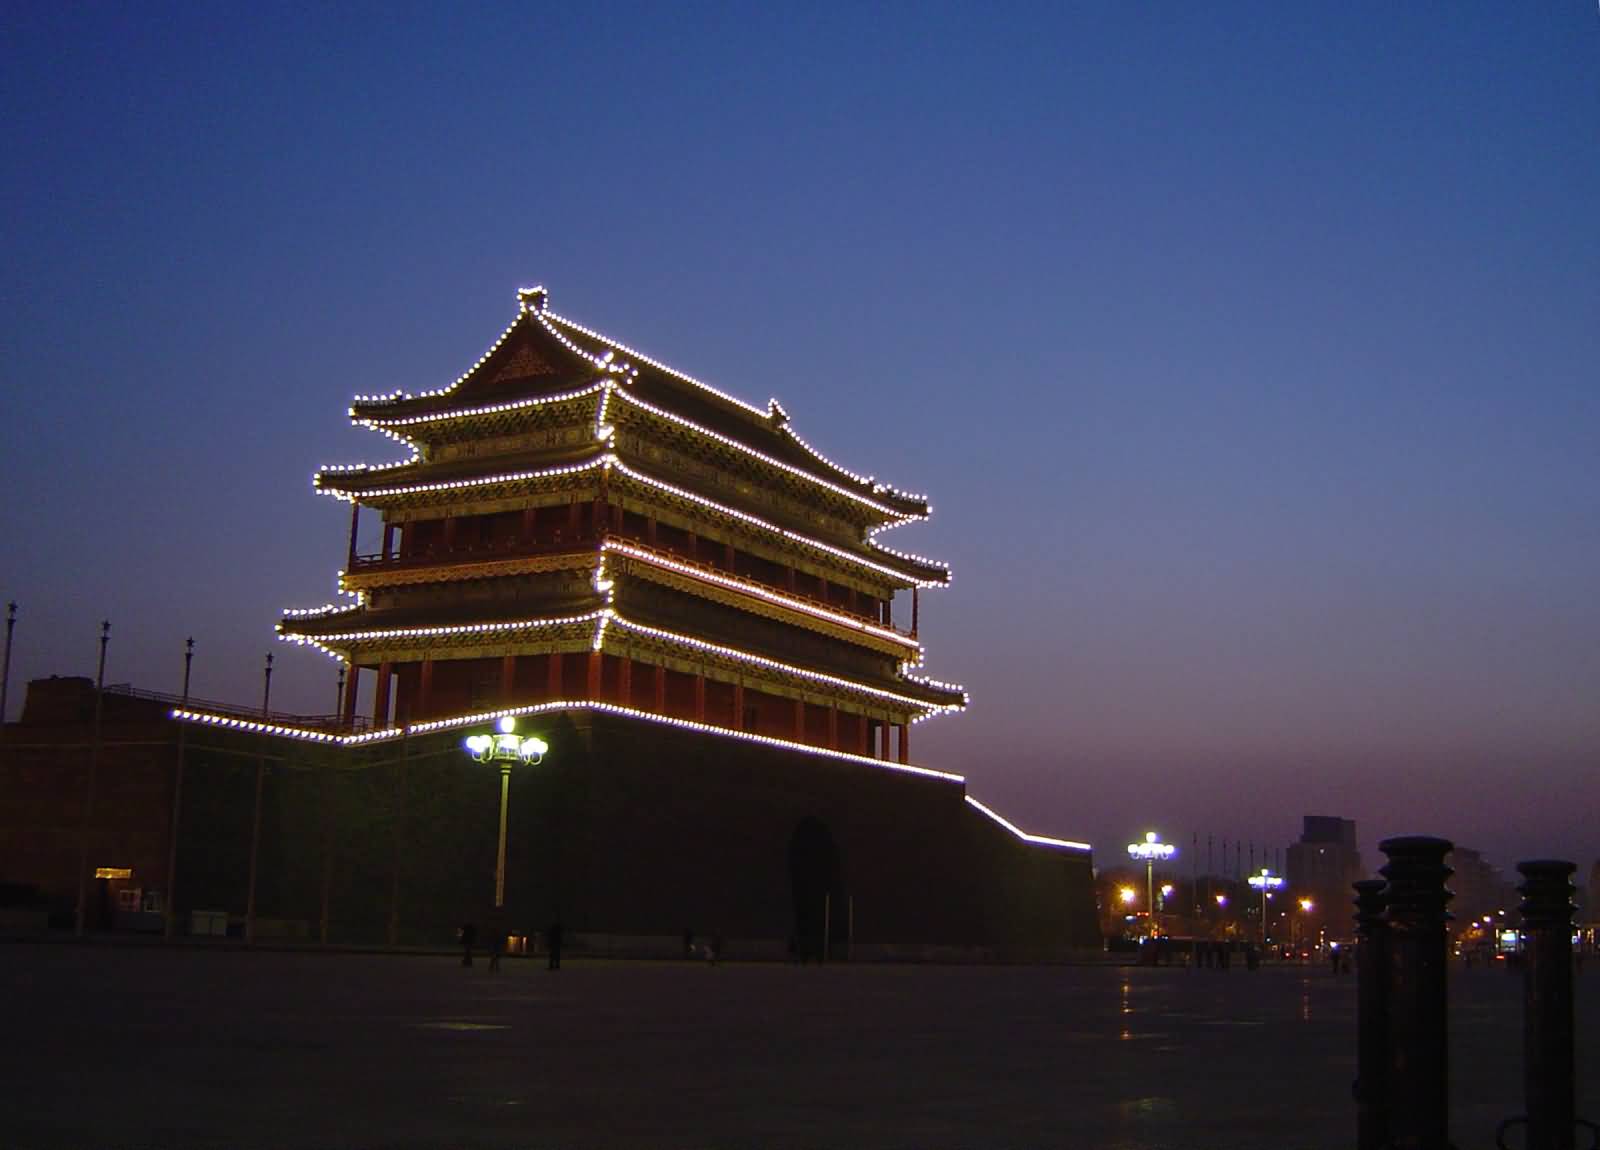 Forbidden City Palace In Beijing, China At Night Time